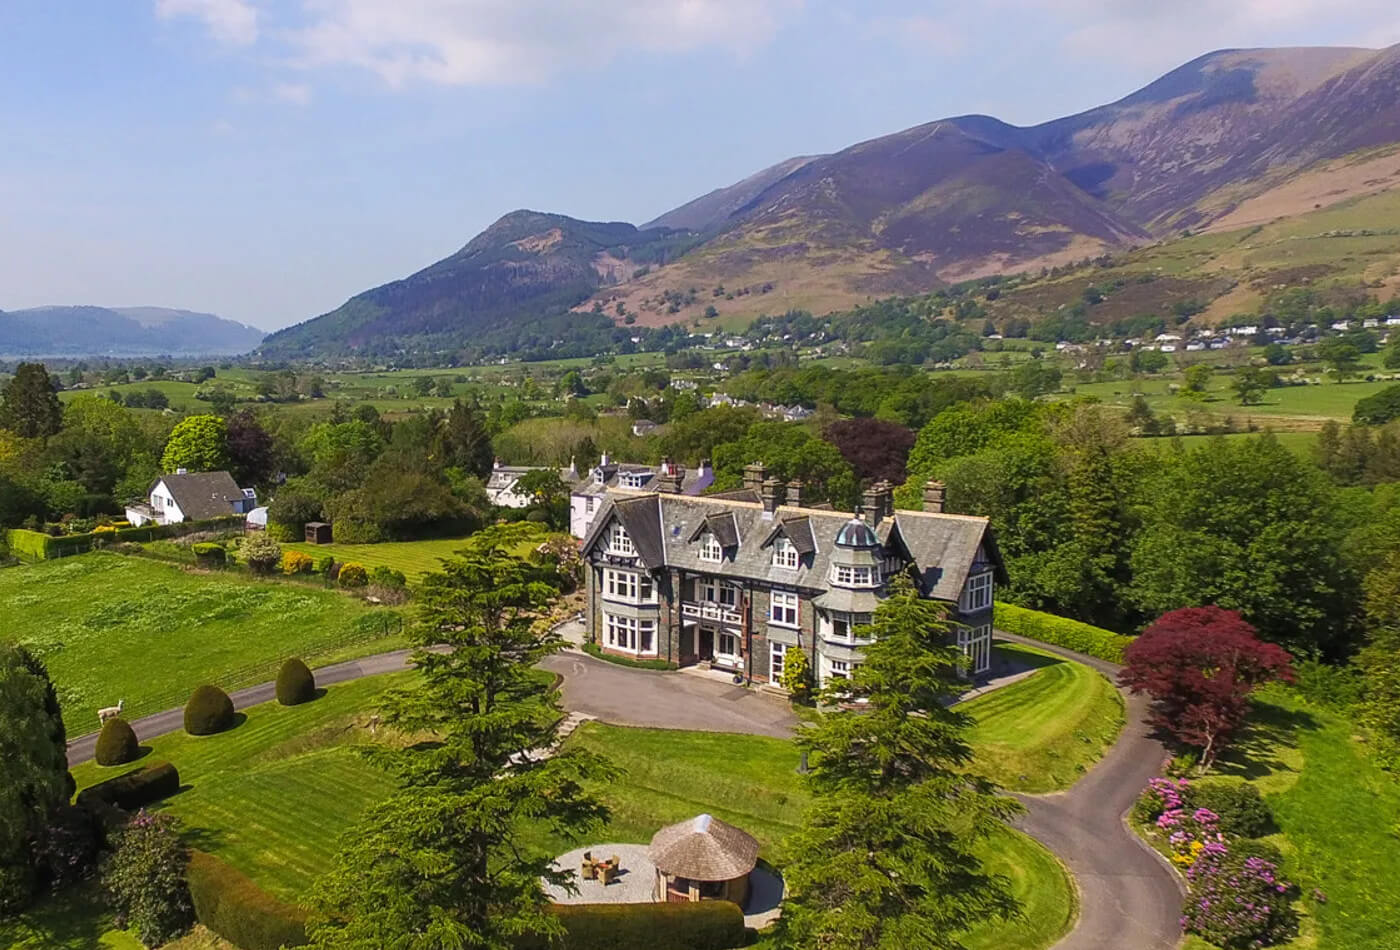 Bristowe Hill surrounded by green countryside in the Lake District